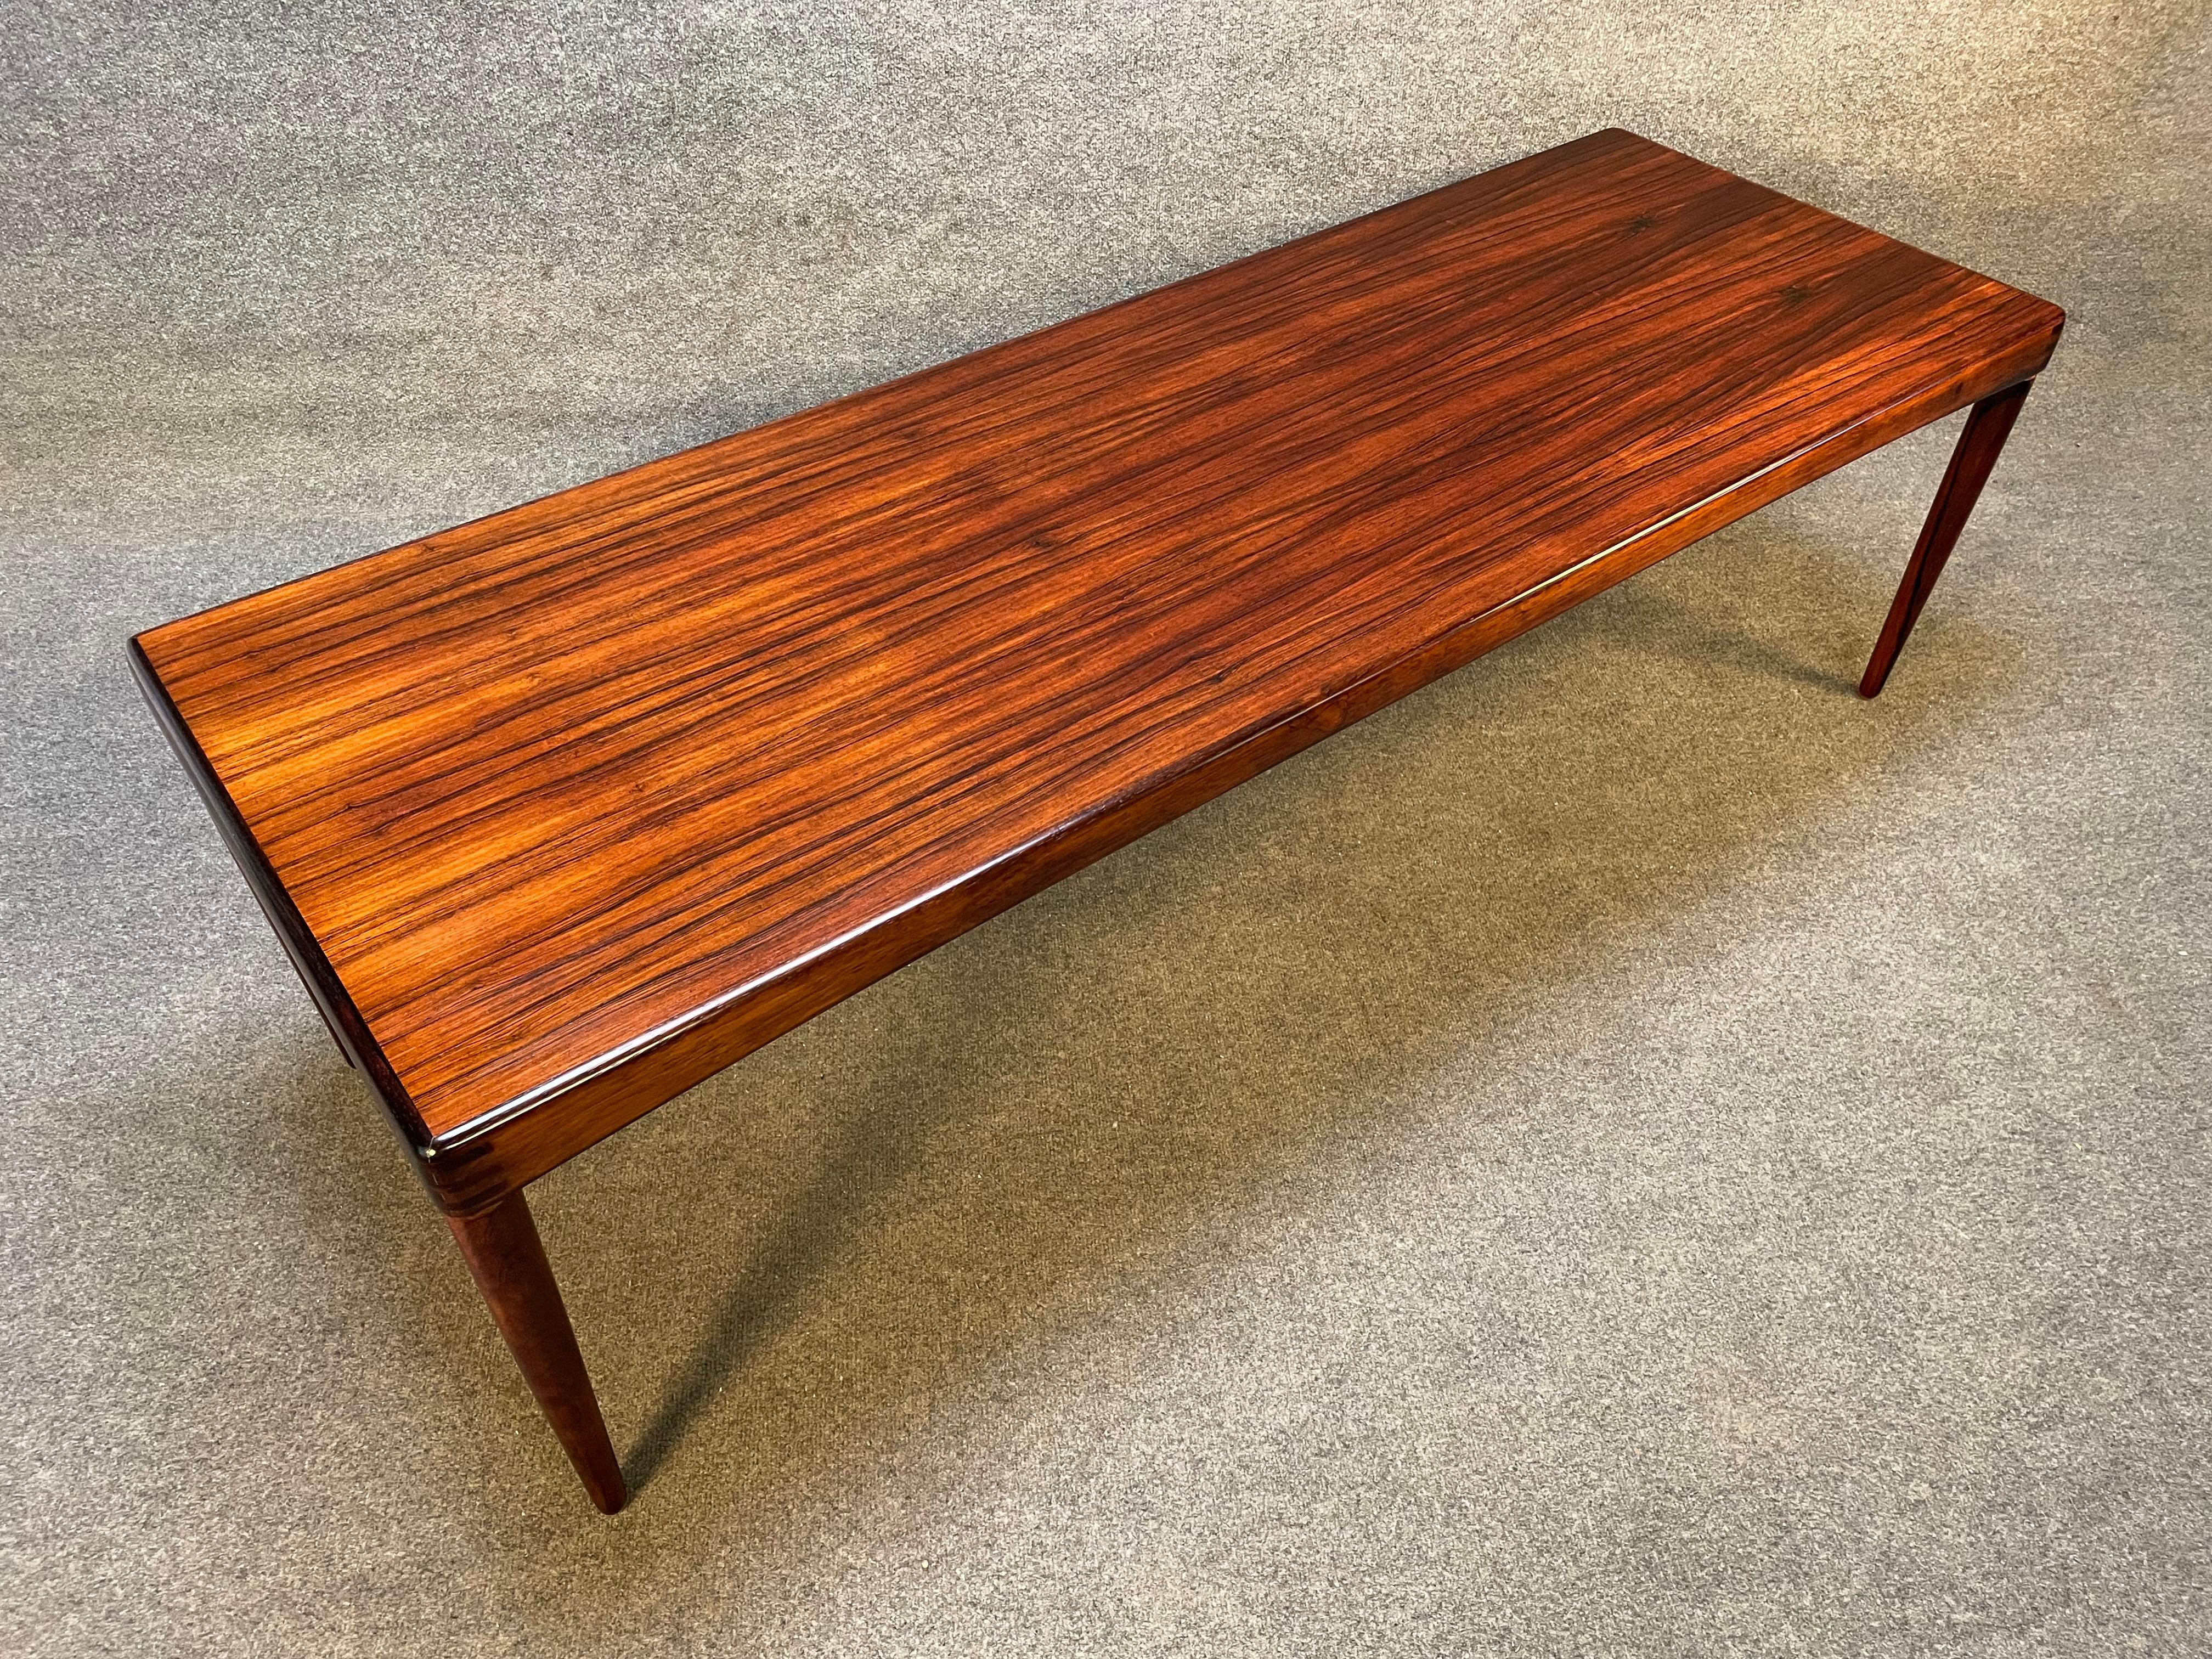 Vintage Danish Mid Century Modern Rosewood Coffee Table by HW Klein for Bramin 1